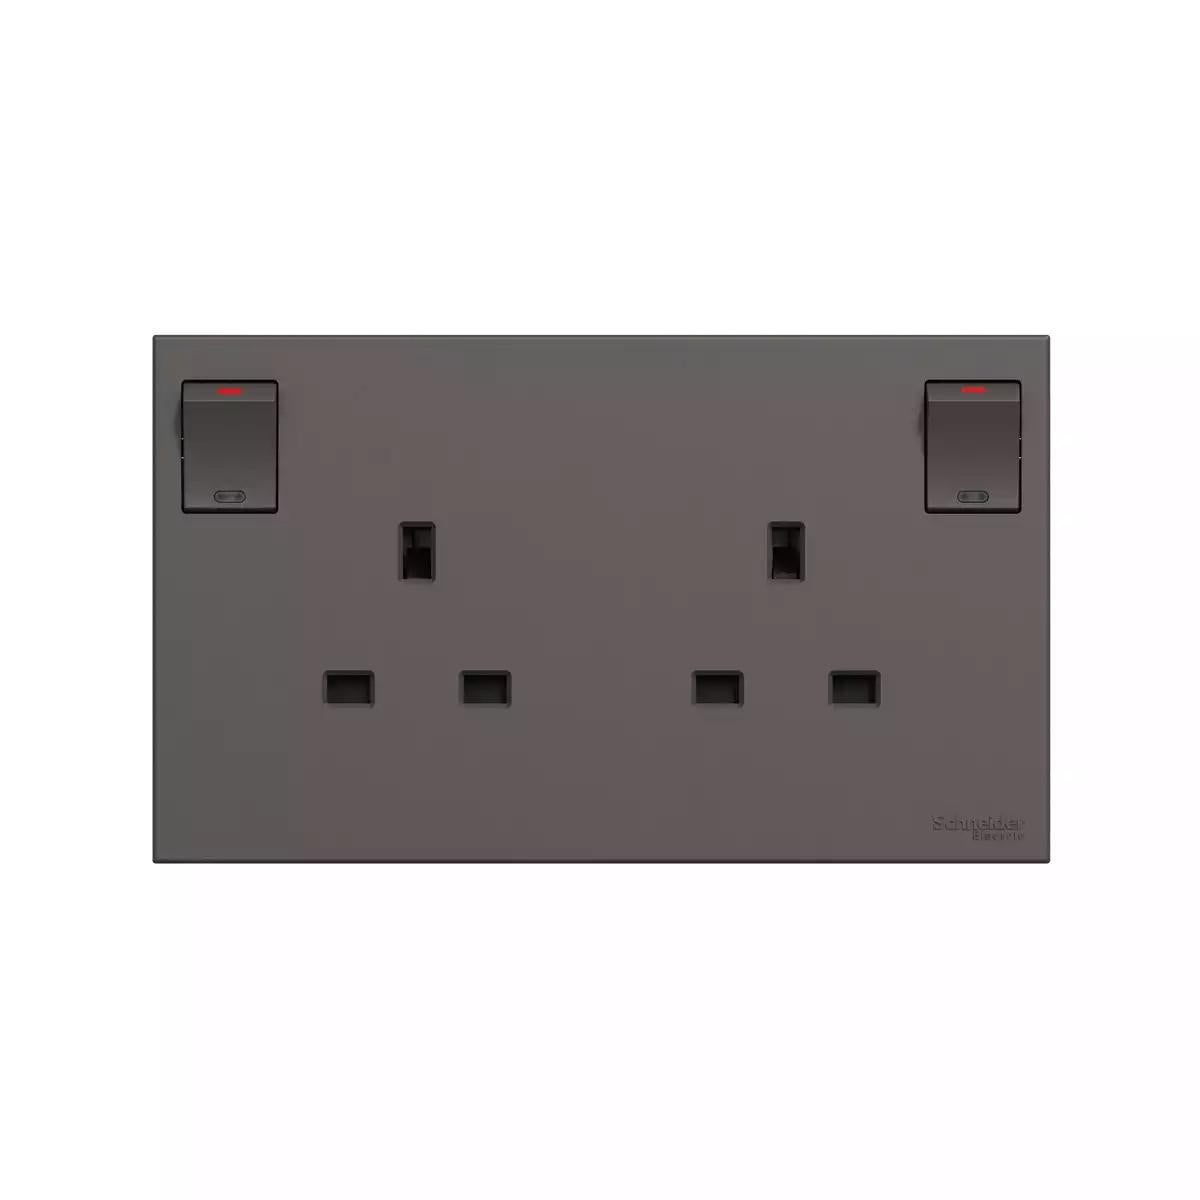 AvatarOn C Switched socket, 13A 250V, 2 gang, with LED, Dark Grey